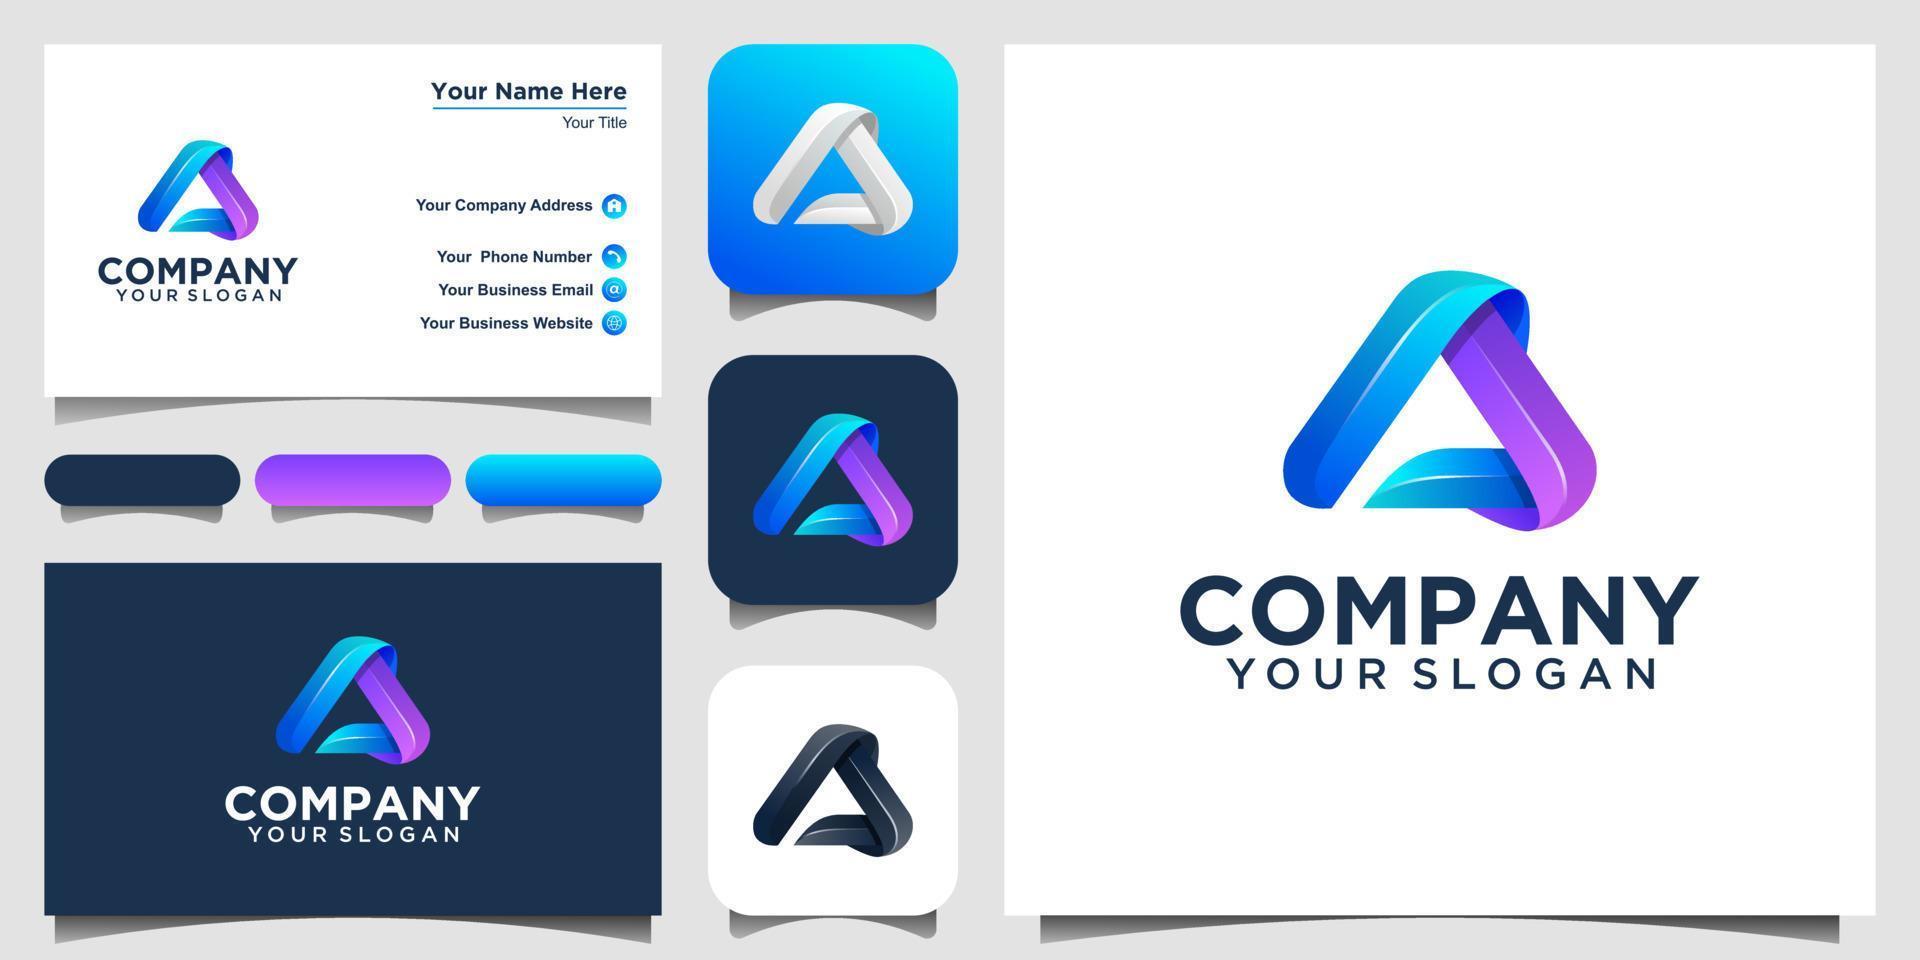 A letter colorful logo, Vector design template elements for your application or company identity.